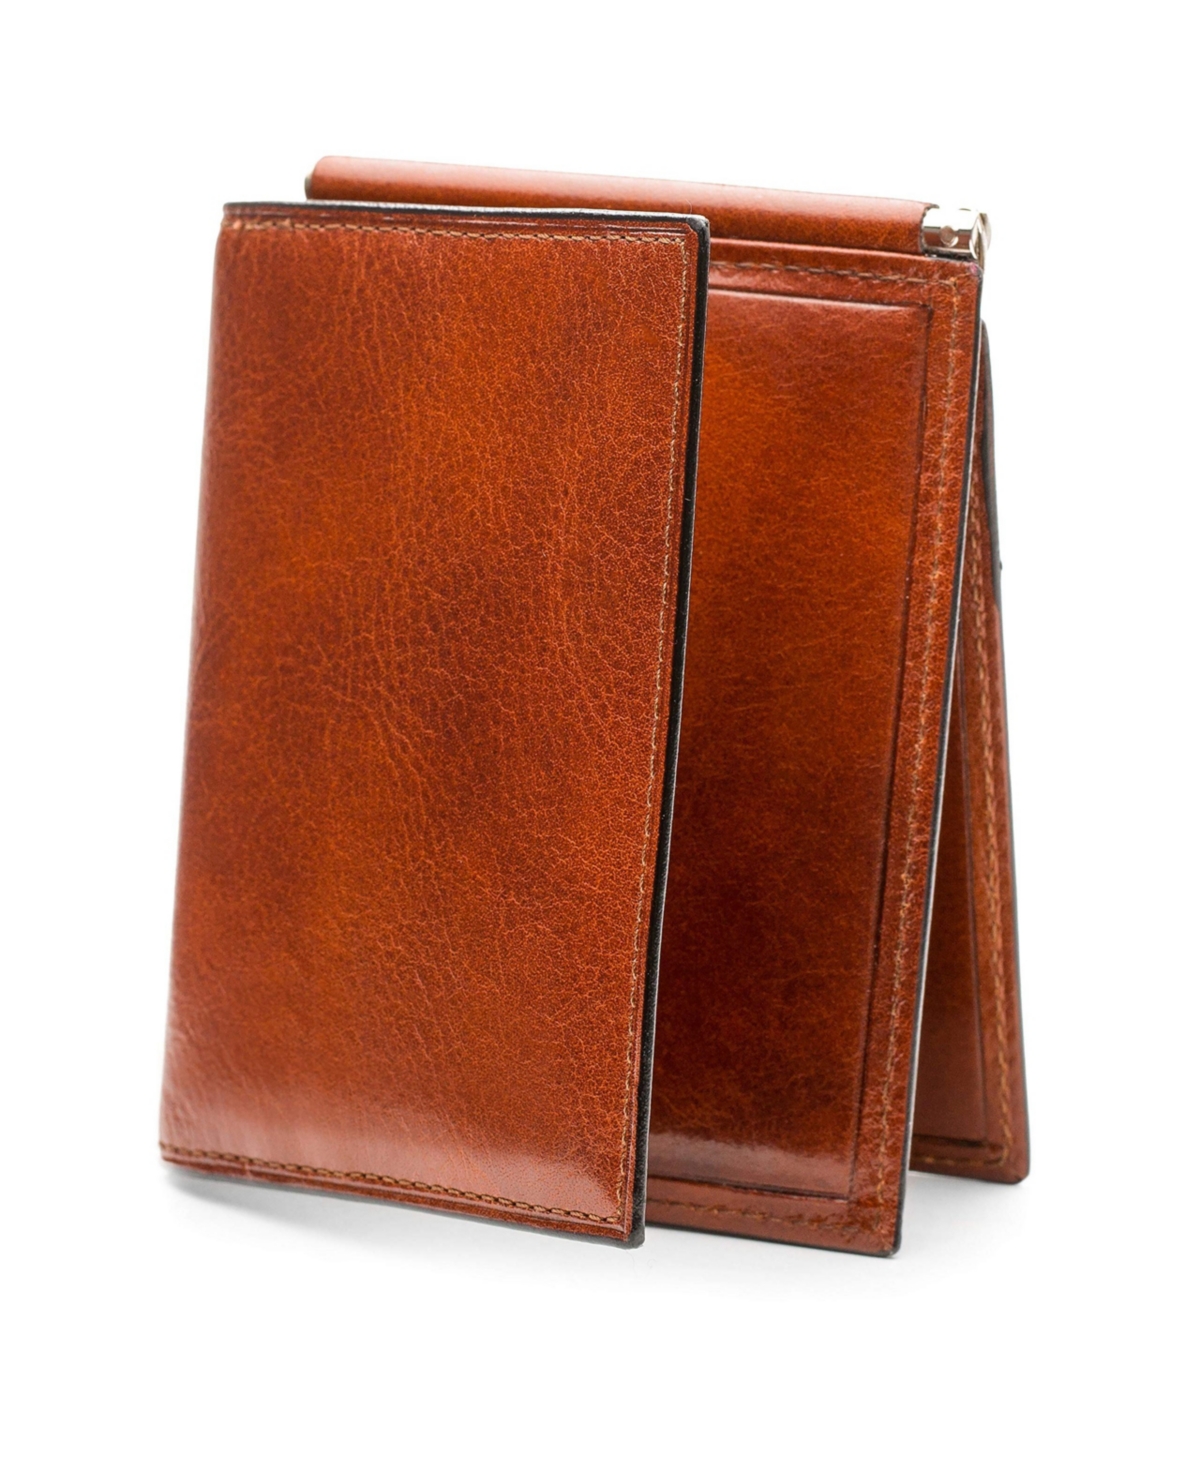 Men's Leather Money Clip with pocket - Amber